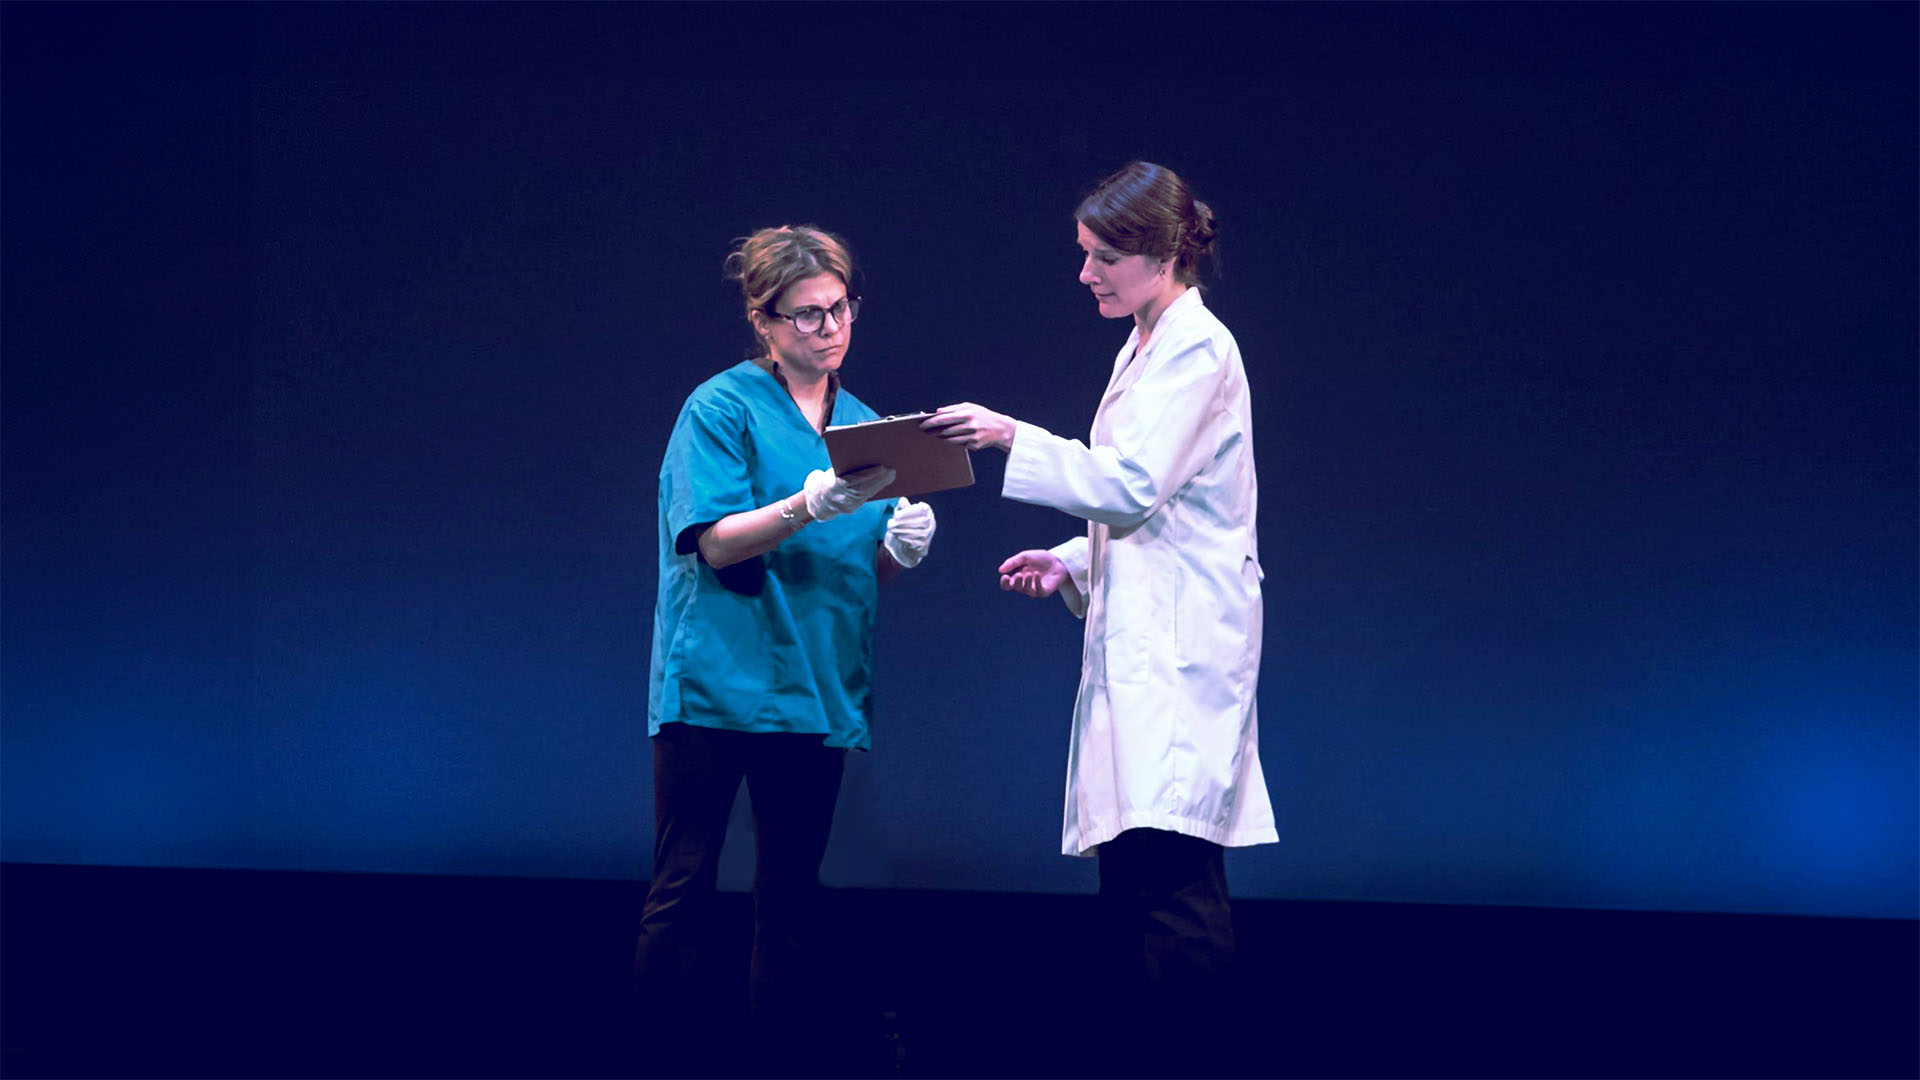 Both nurse and a doctor (females) looking at patient notes together, standing on stage